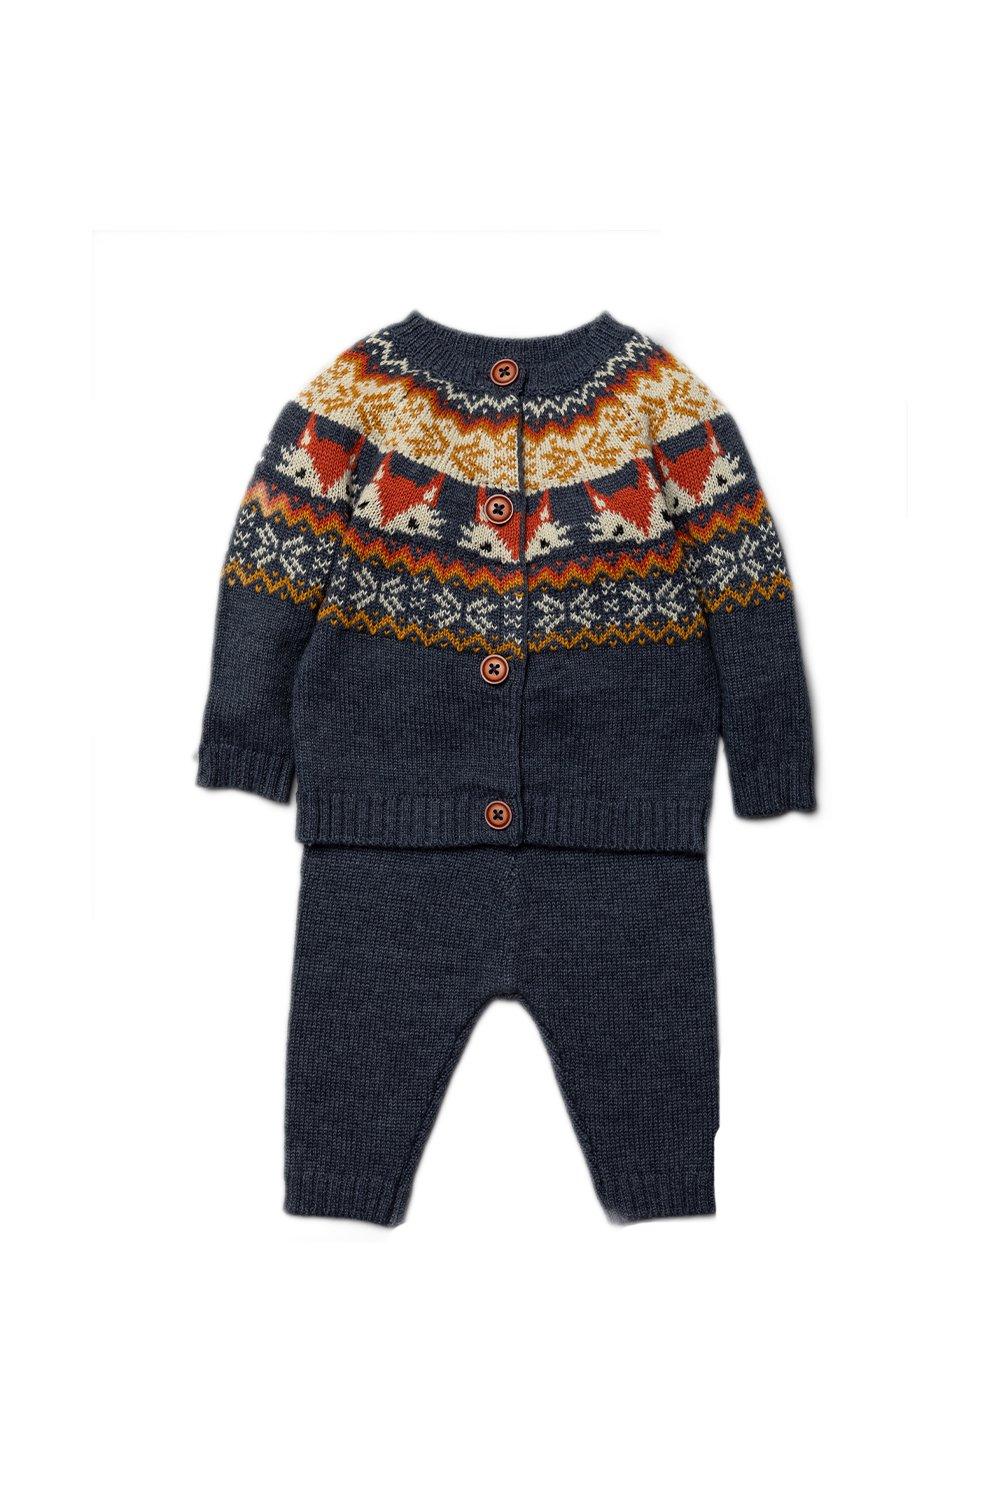 Fairisle Knitted Two-Piece Jumper and Bottom Set